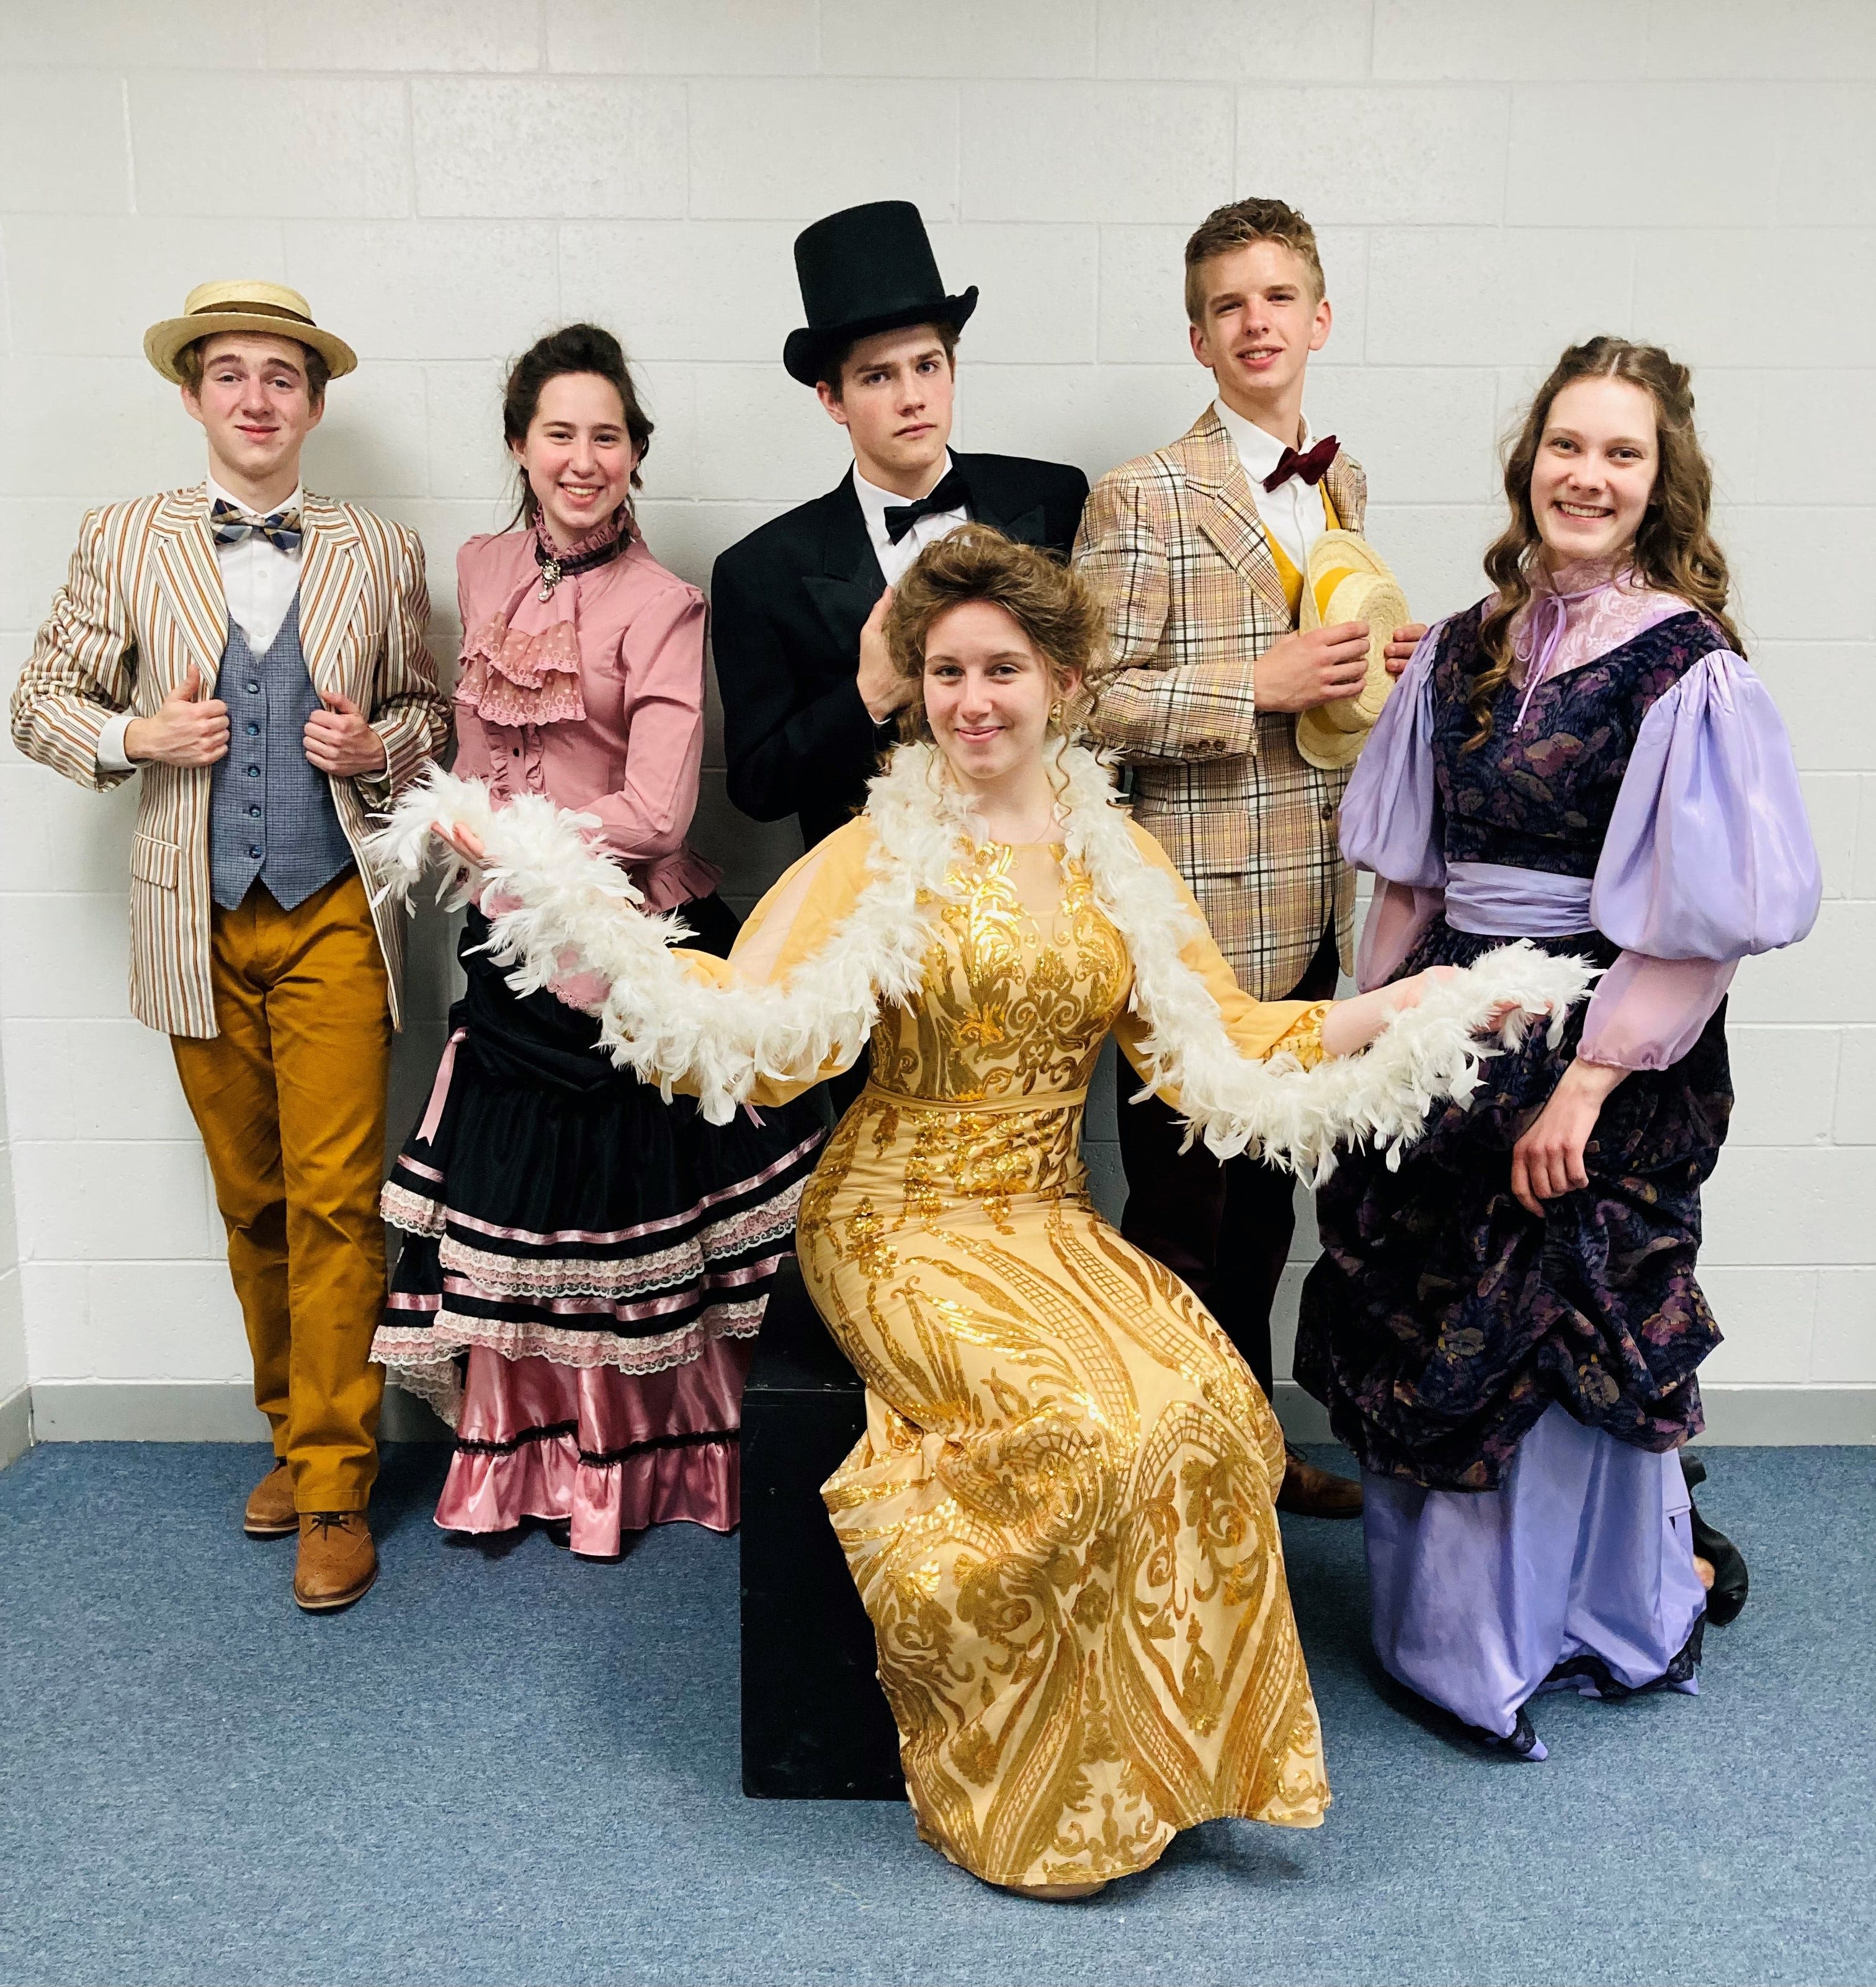 What to know before you go: Valley Troubadours stage musical 'Hello, Dolly!'